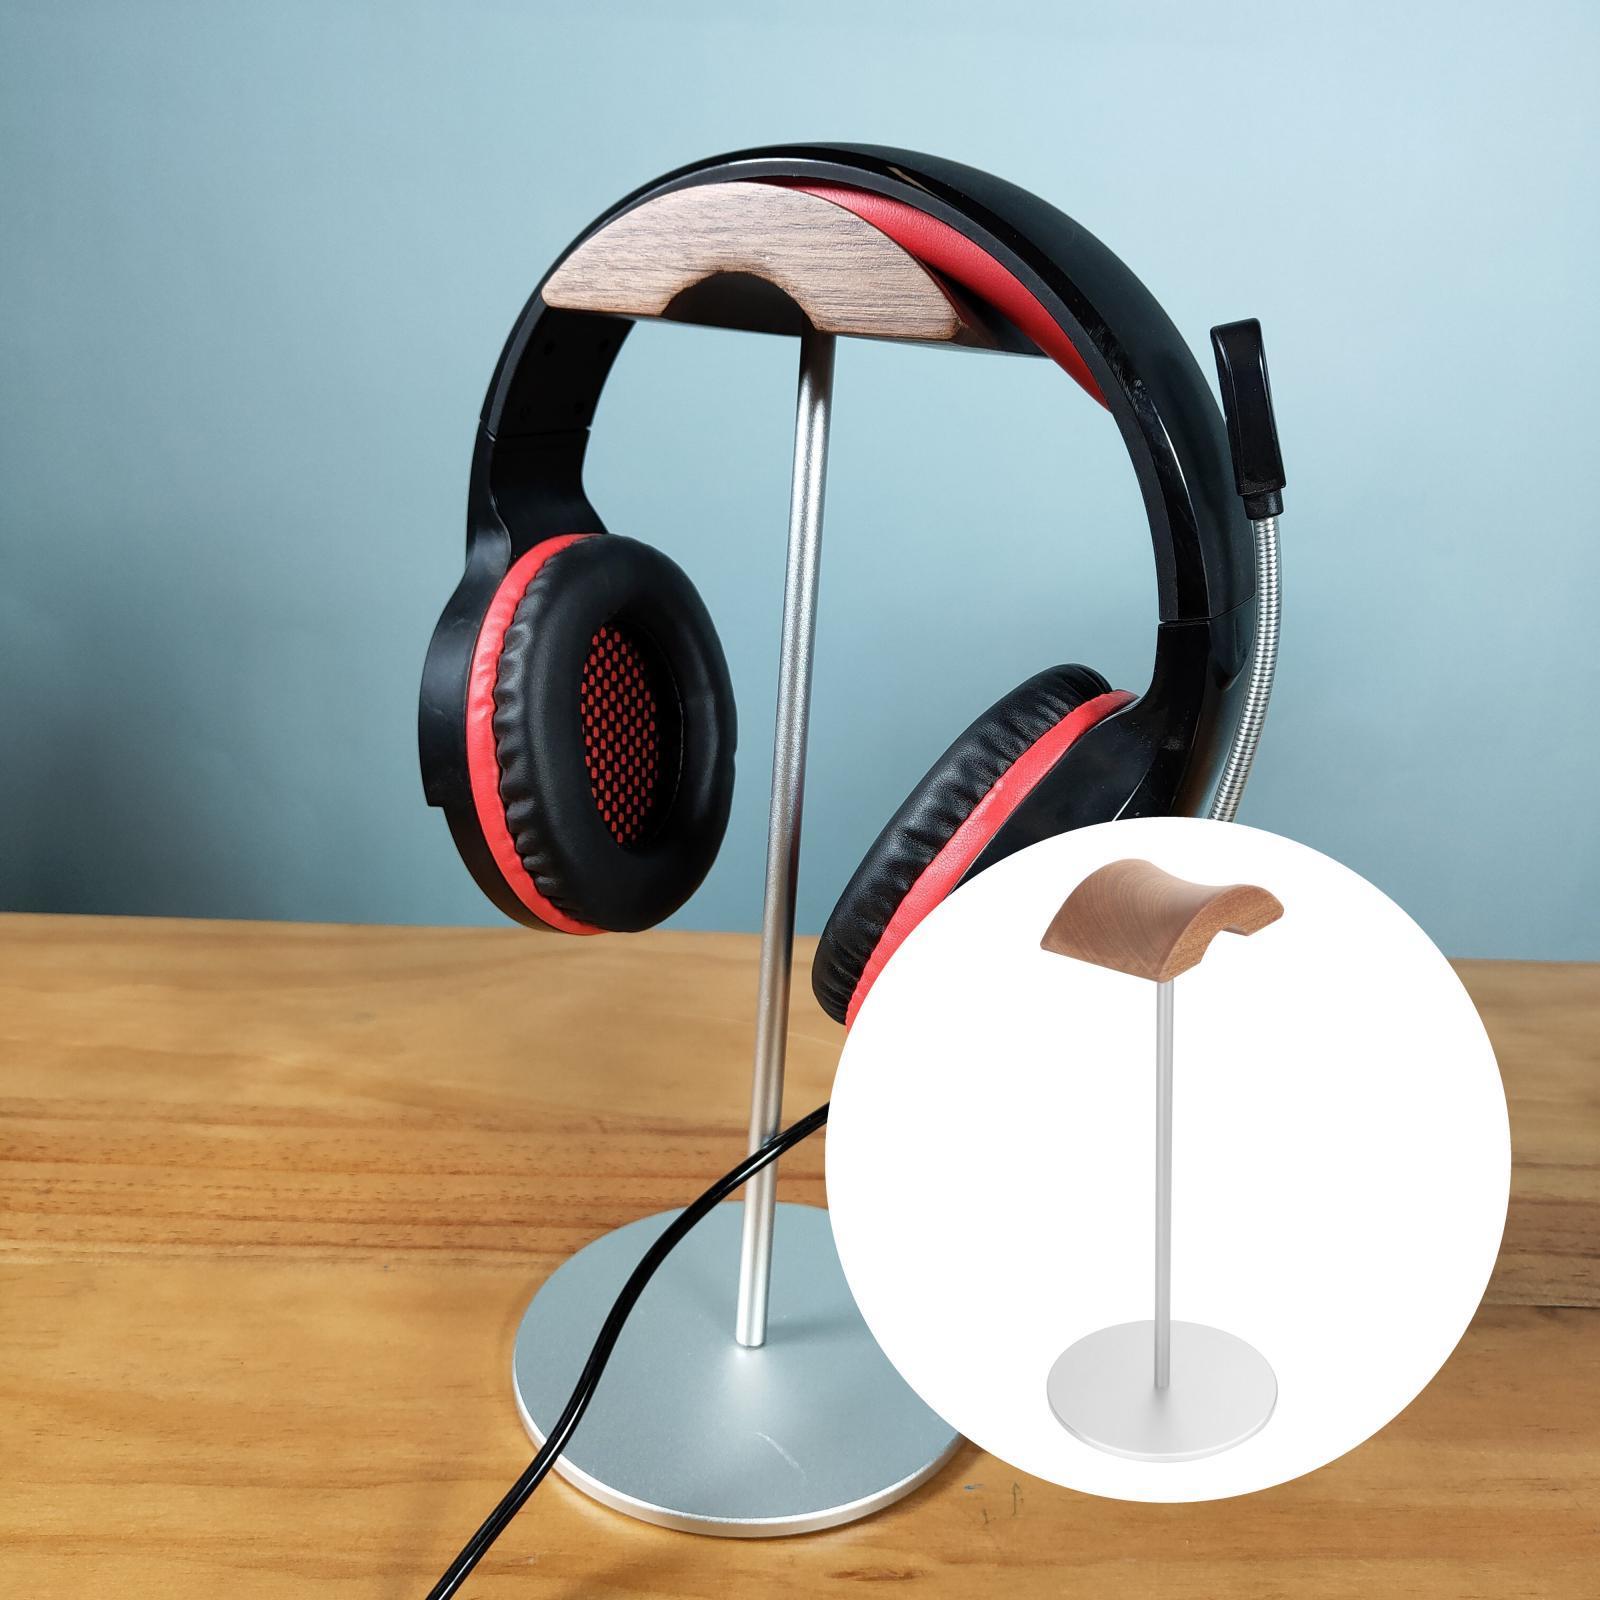 Headphone Stand Natural Wood Mount for Headphones